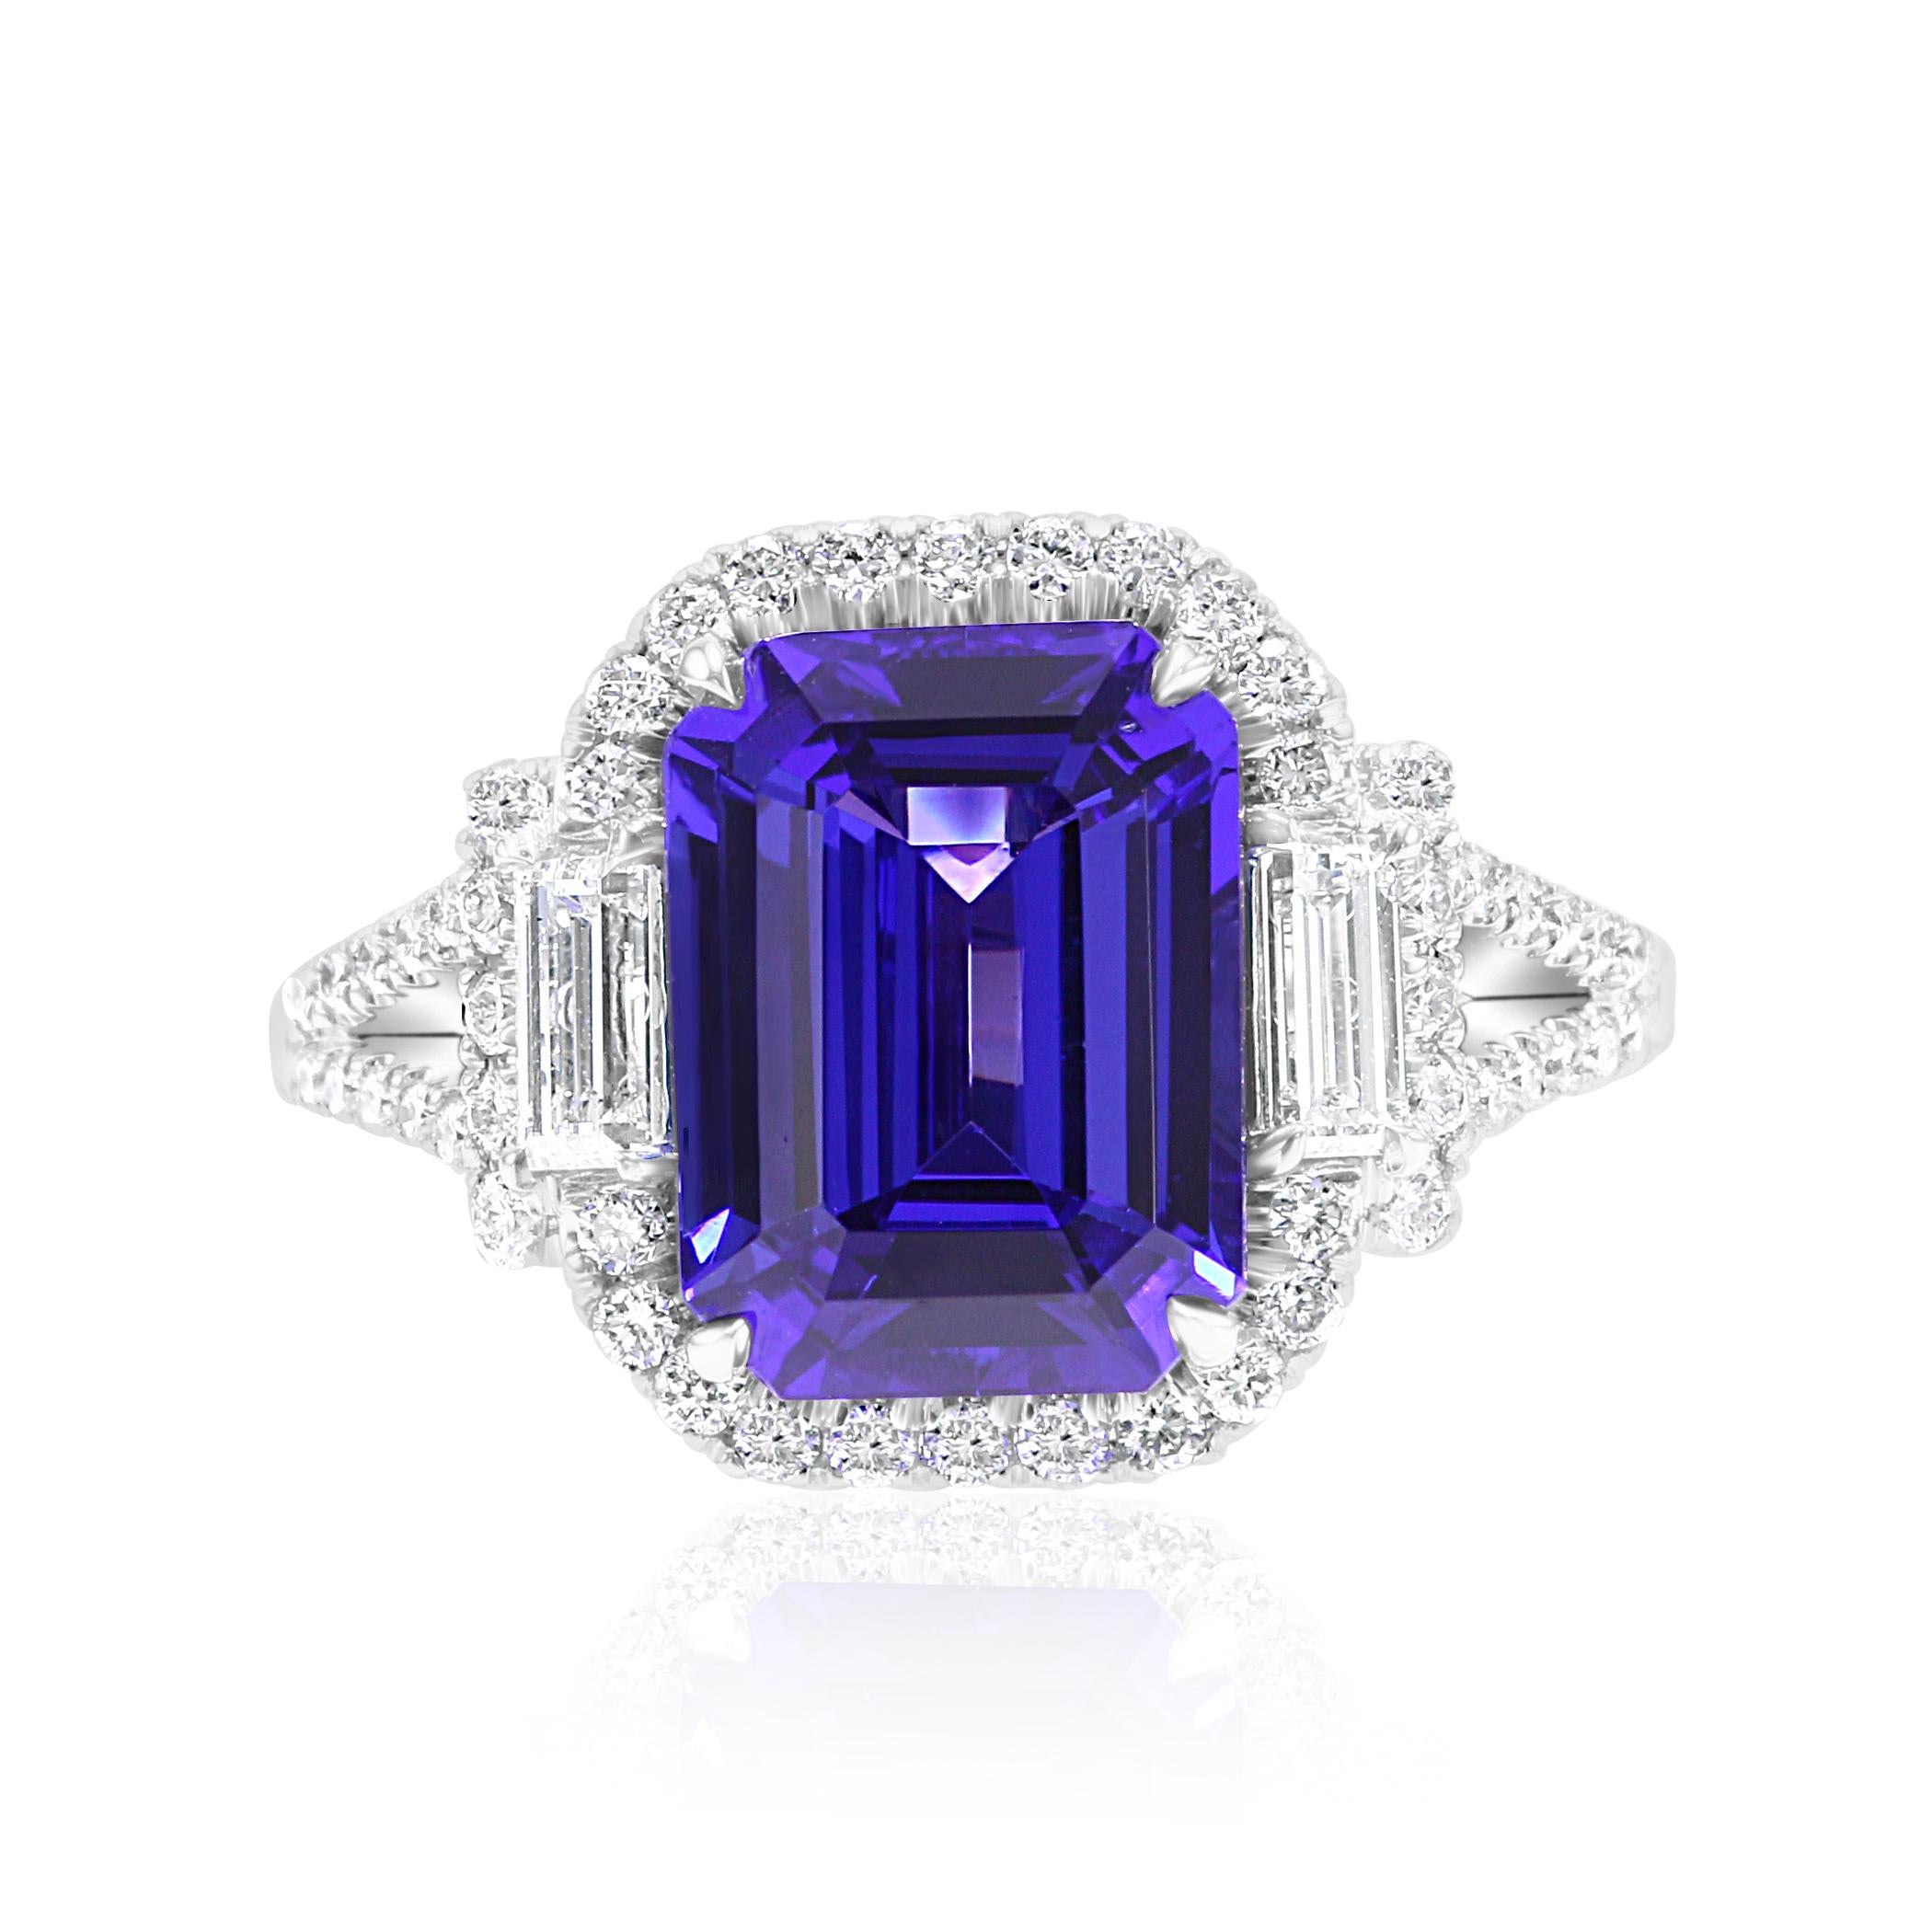 Stunning Tanzanite Emerald Cut 4.45 Carat Flanked with 2 White GH Color Diamond Baguette VS-SI clarity 0.38 Carat. Encircled in a single Halo of White GH color VS-SI clarity Diamond Rounds 0.65 Carat in gorgeous Hand Crafted in 18K White Gold. Can